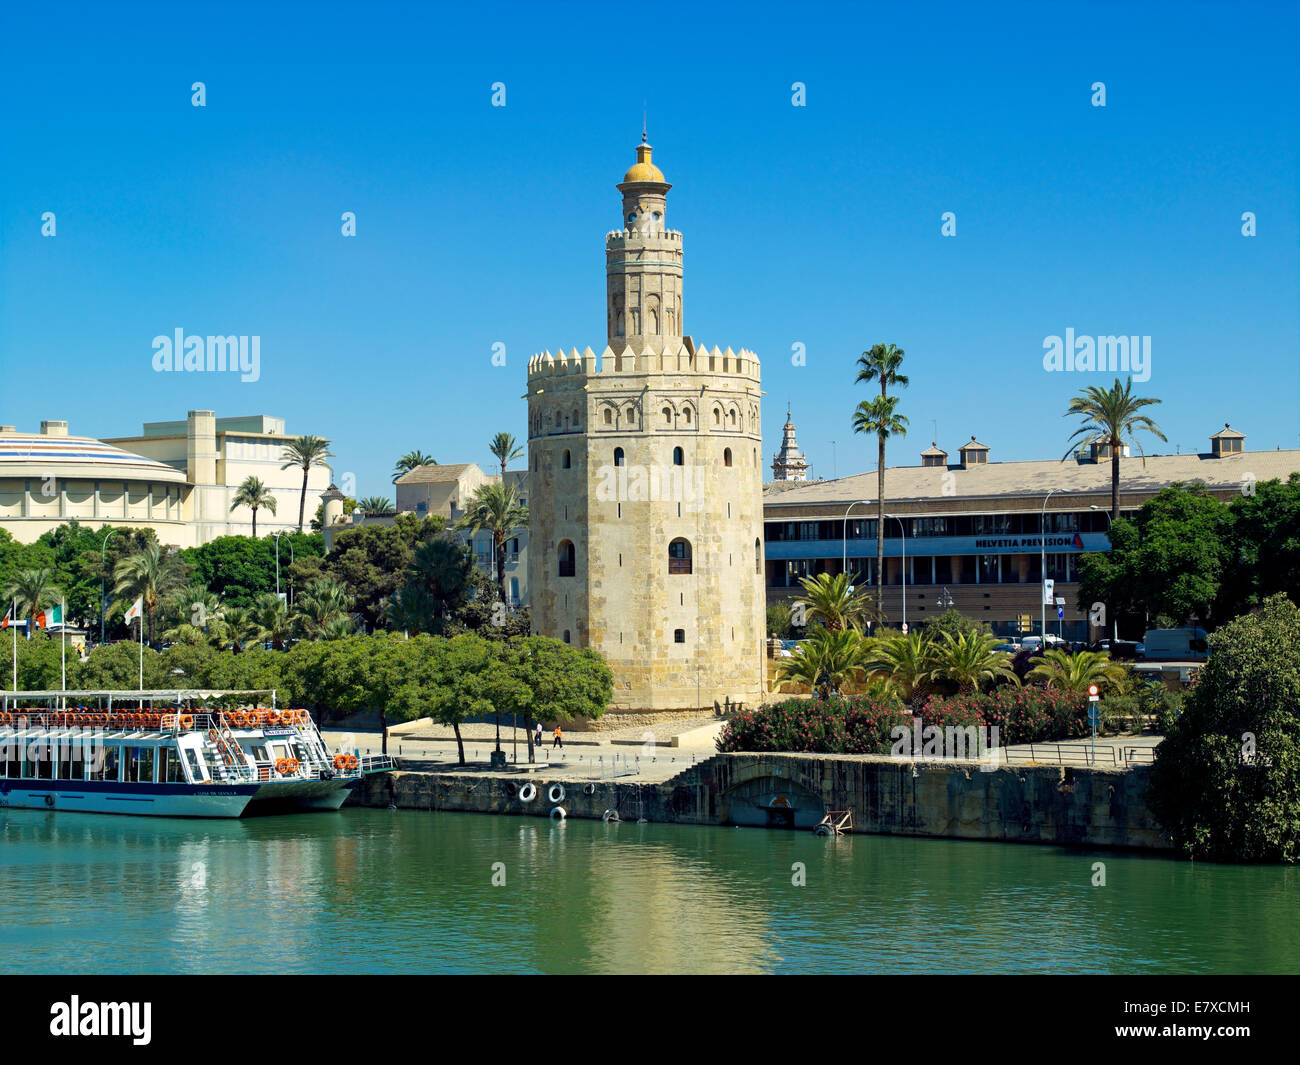 The Torre del Oro tower in Seville Stock Photo